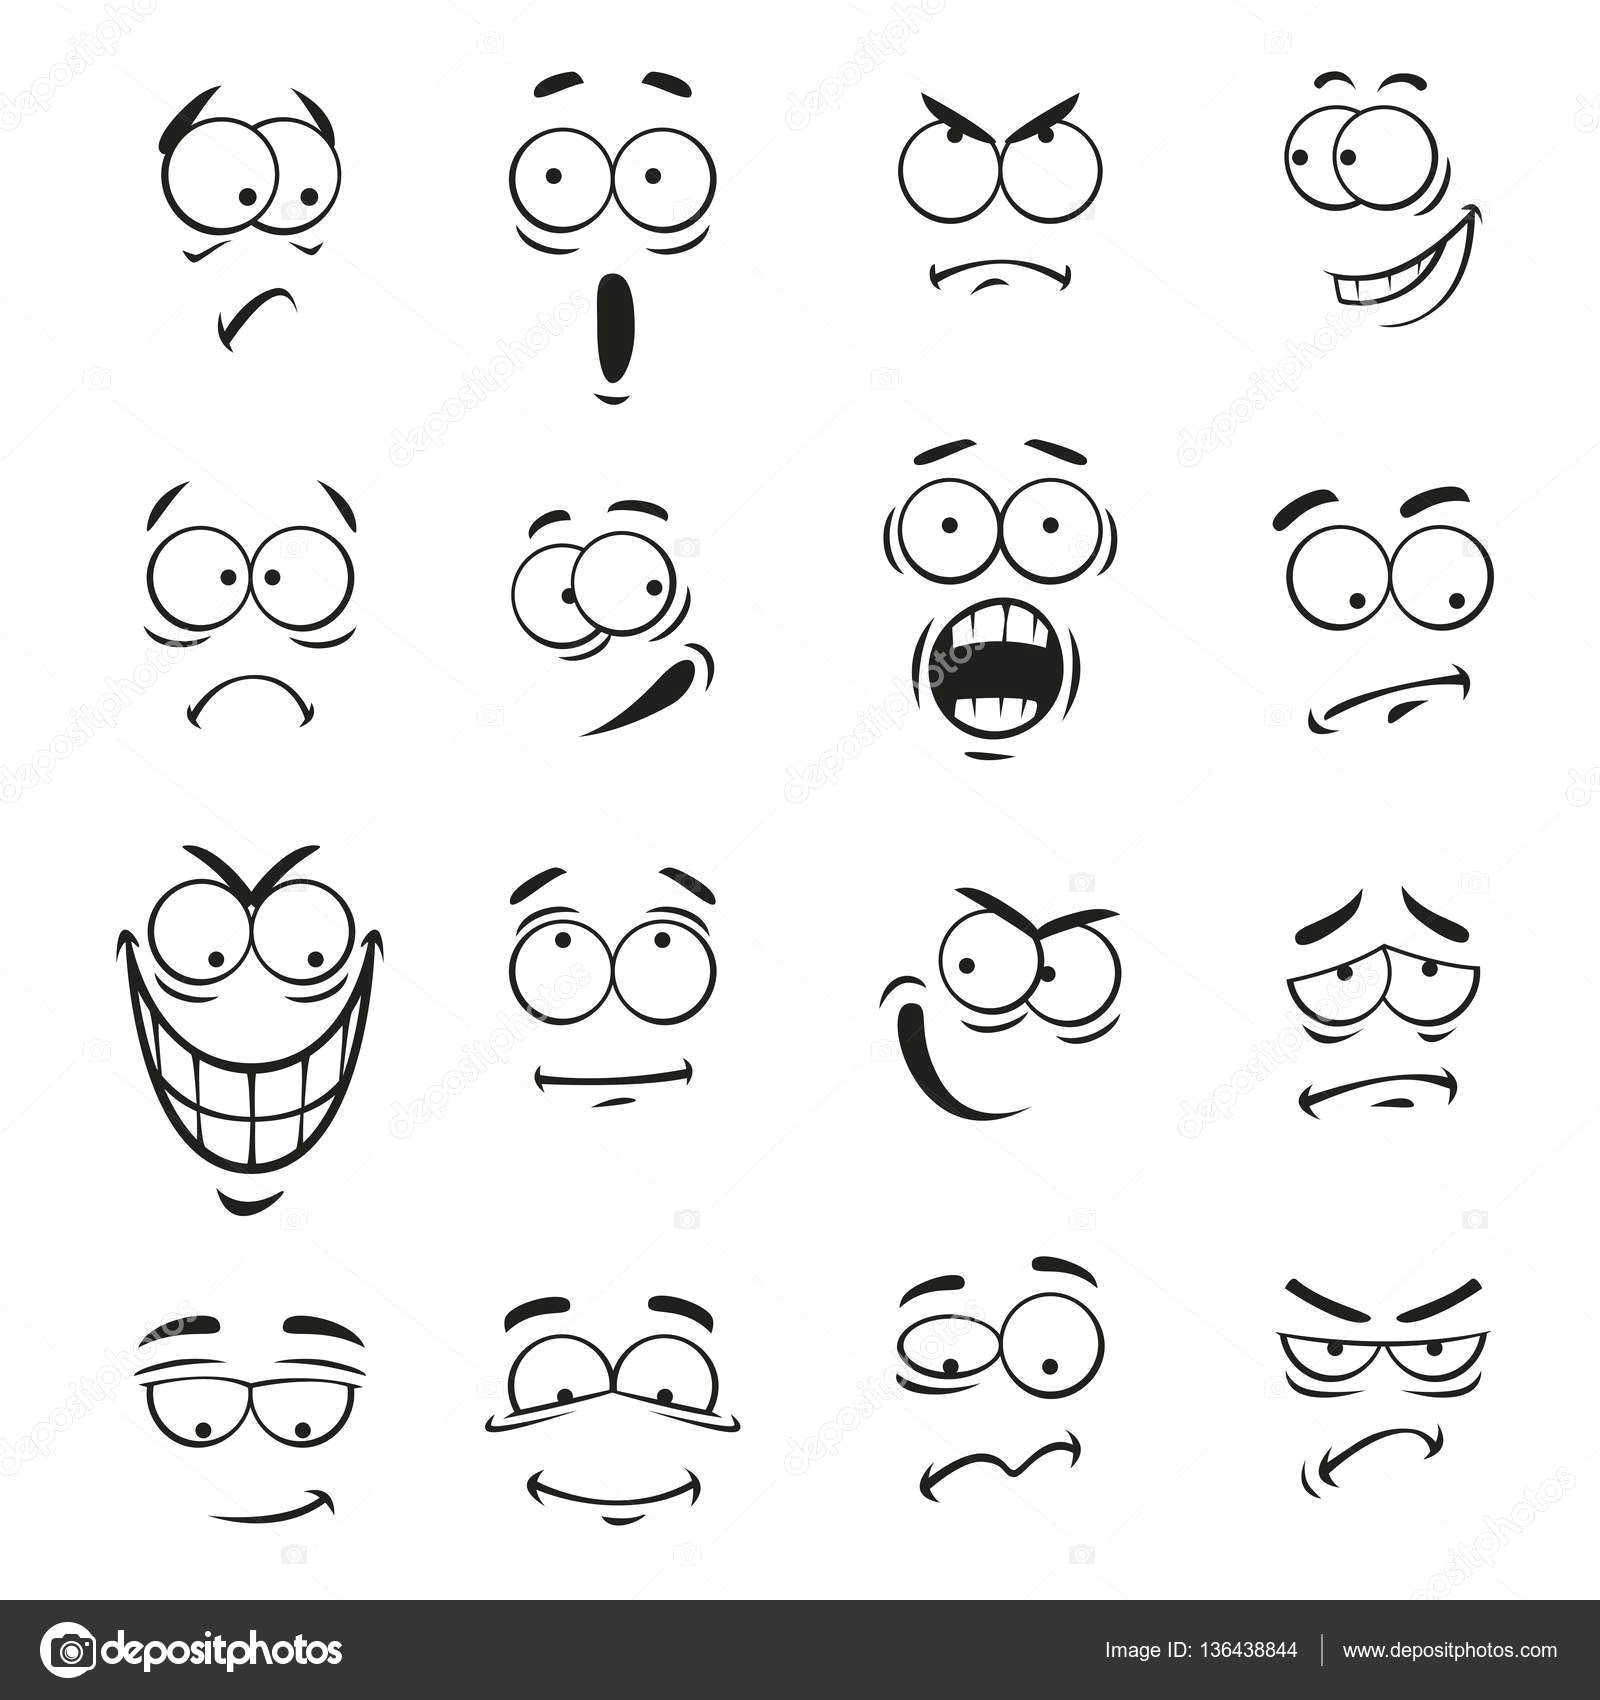 Drawings Of Eyes Cartoon Related Image Character X Press Cartoon Emoticon Emoticon Faces